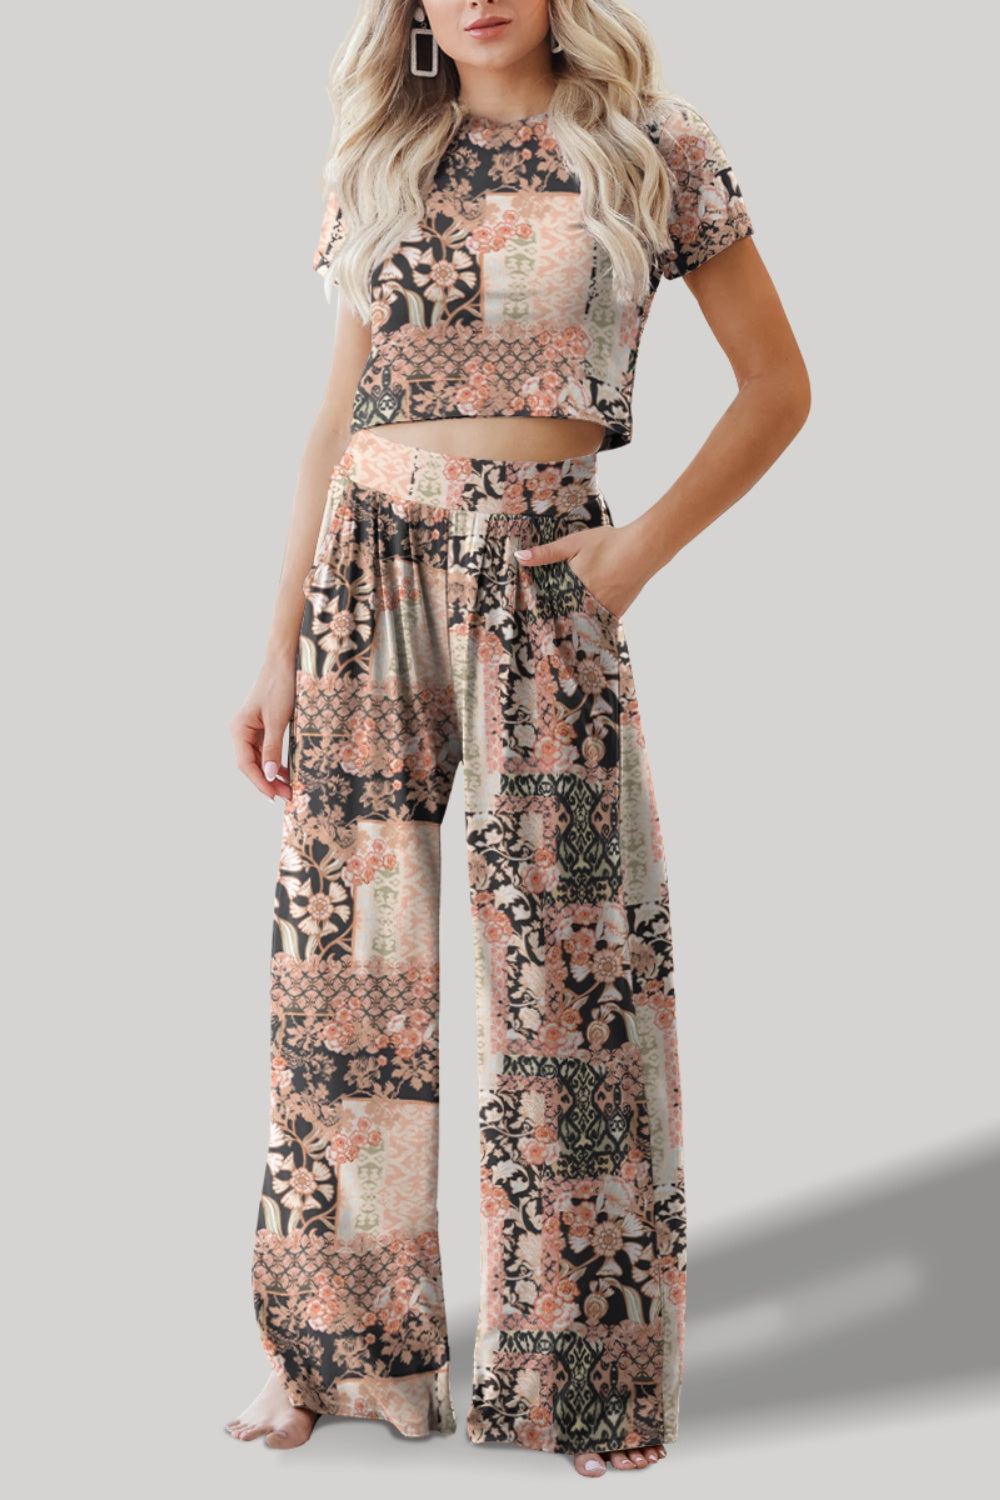 STUNNLY  Printed Round Neck Short Sleeve Top and Pants Set Multicolor S 